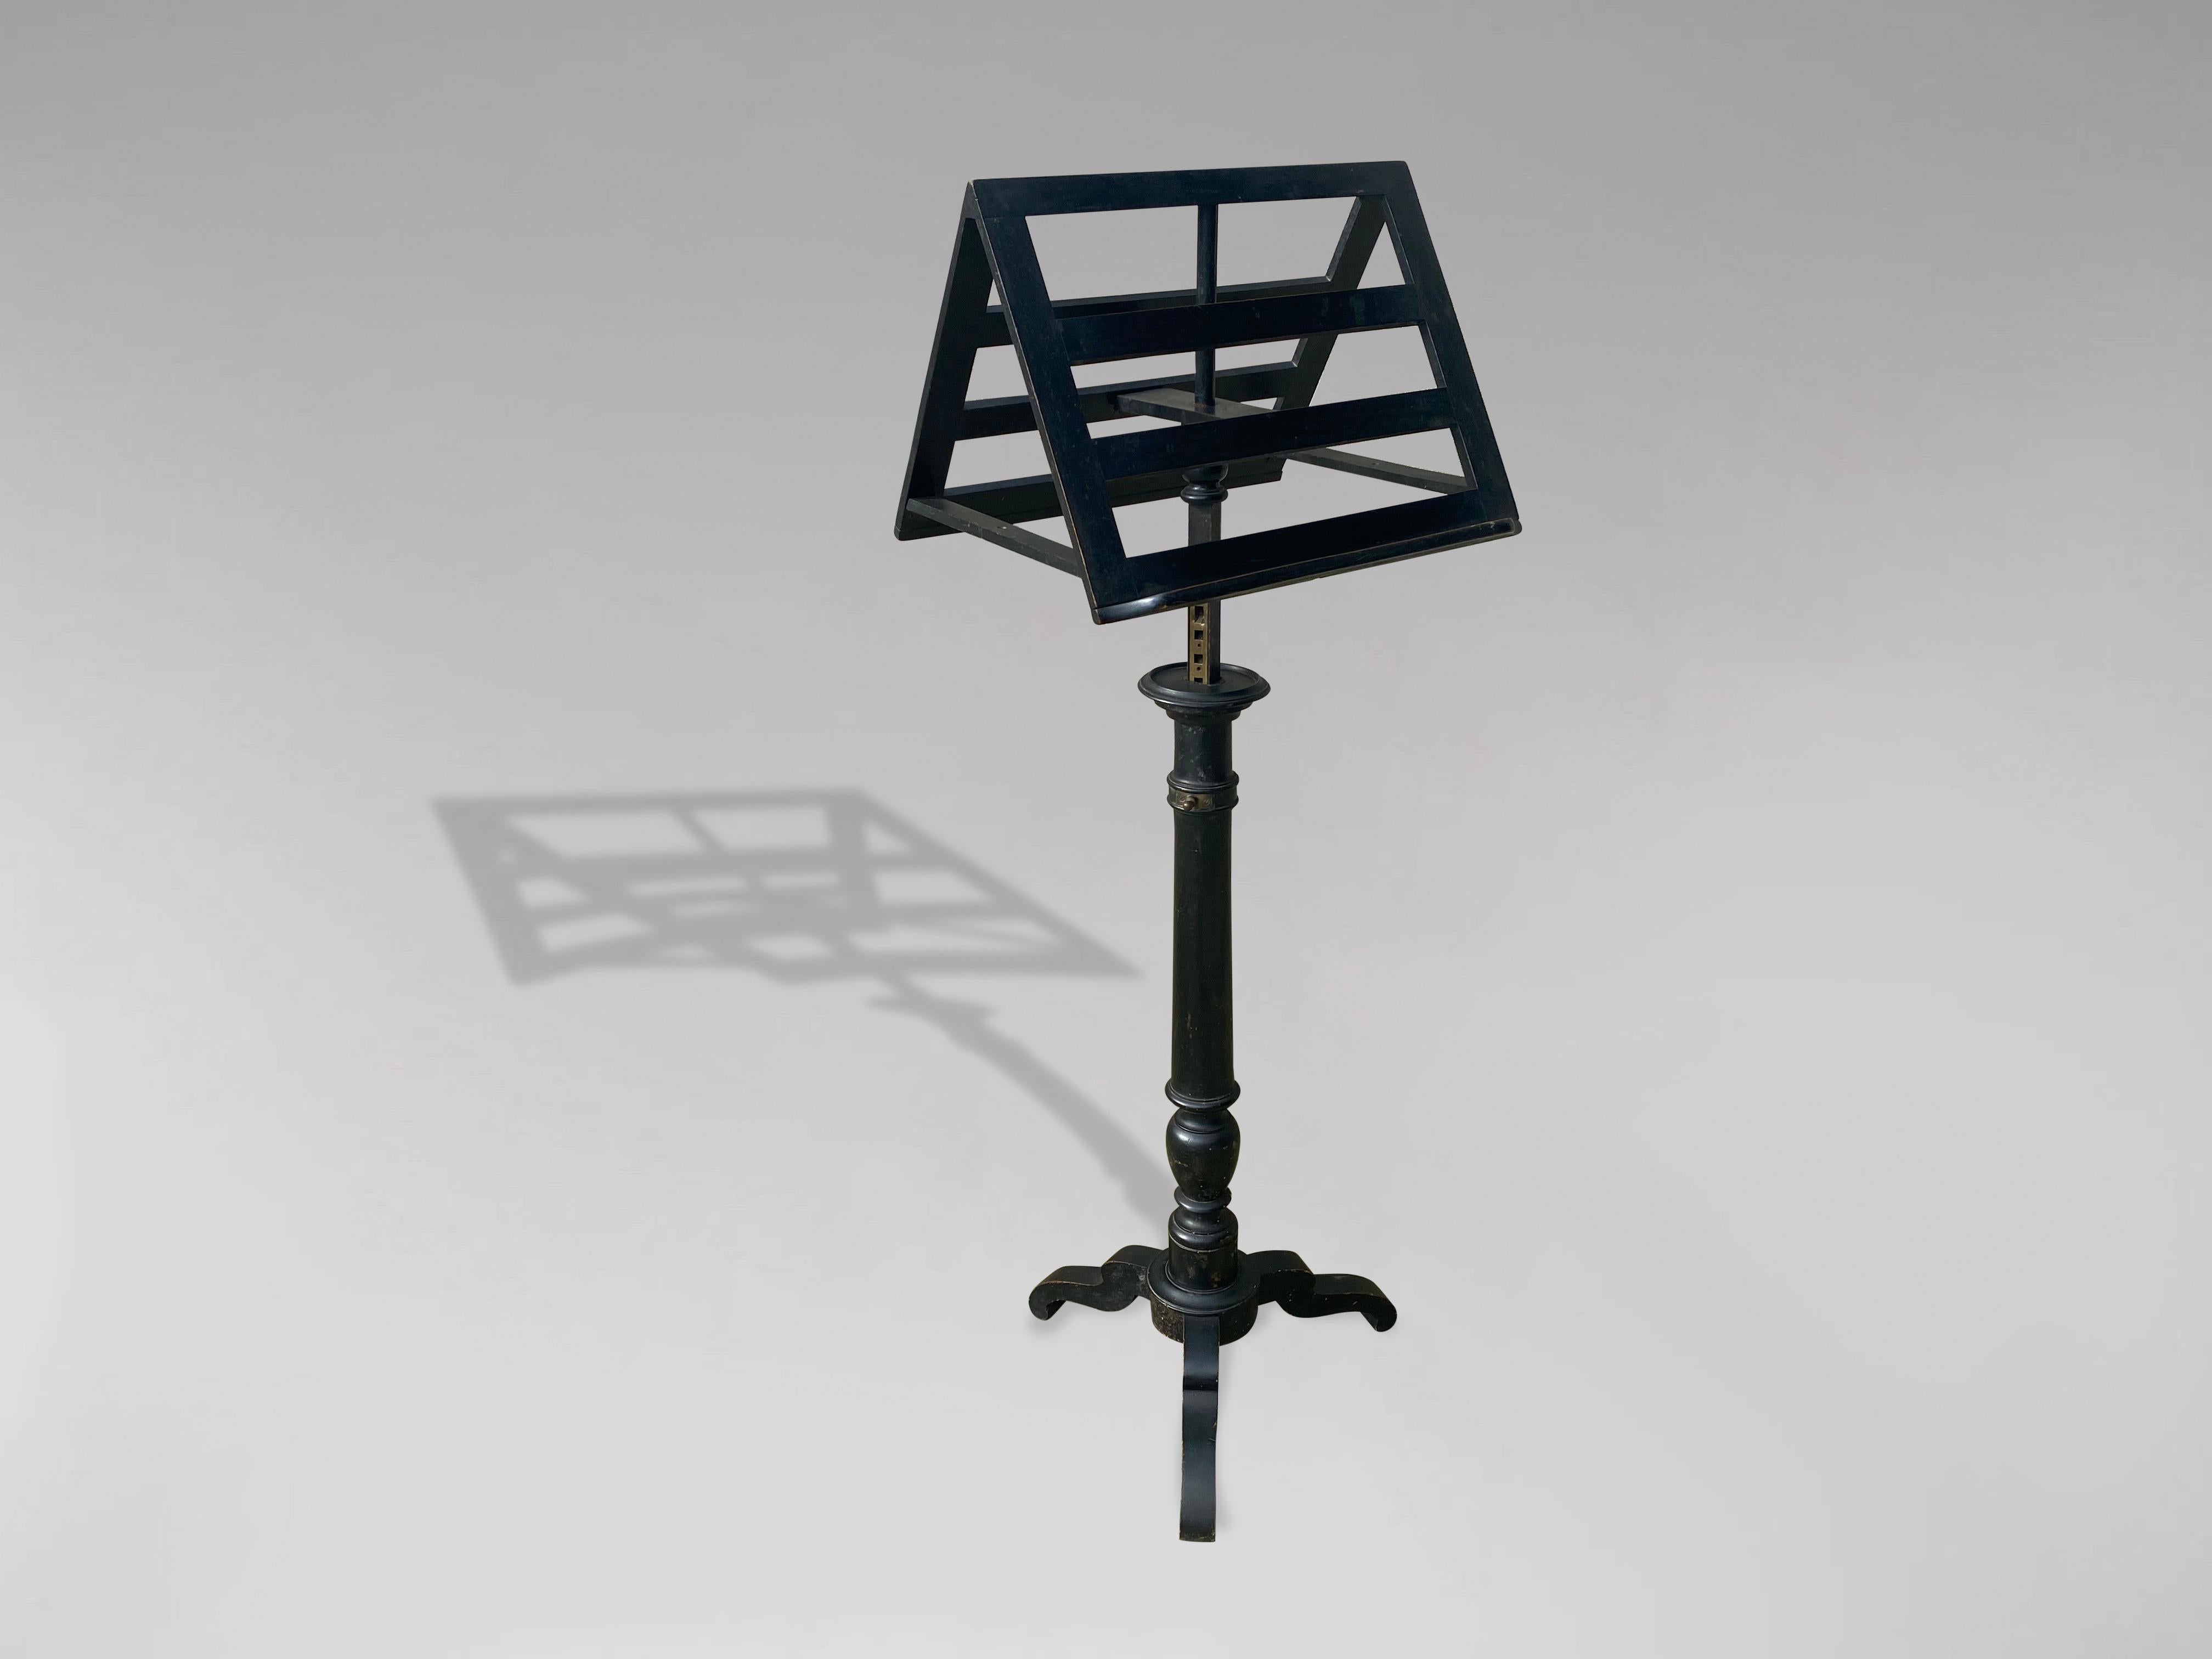 A late 19th century French ebonised duet sheet music with sturdy resting surfaces on each side for sheet music or books. The stand can be adjusted for height using the original brass hardware over a turned wood and fluted column ending in a